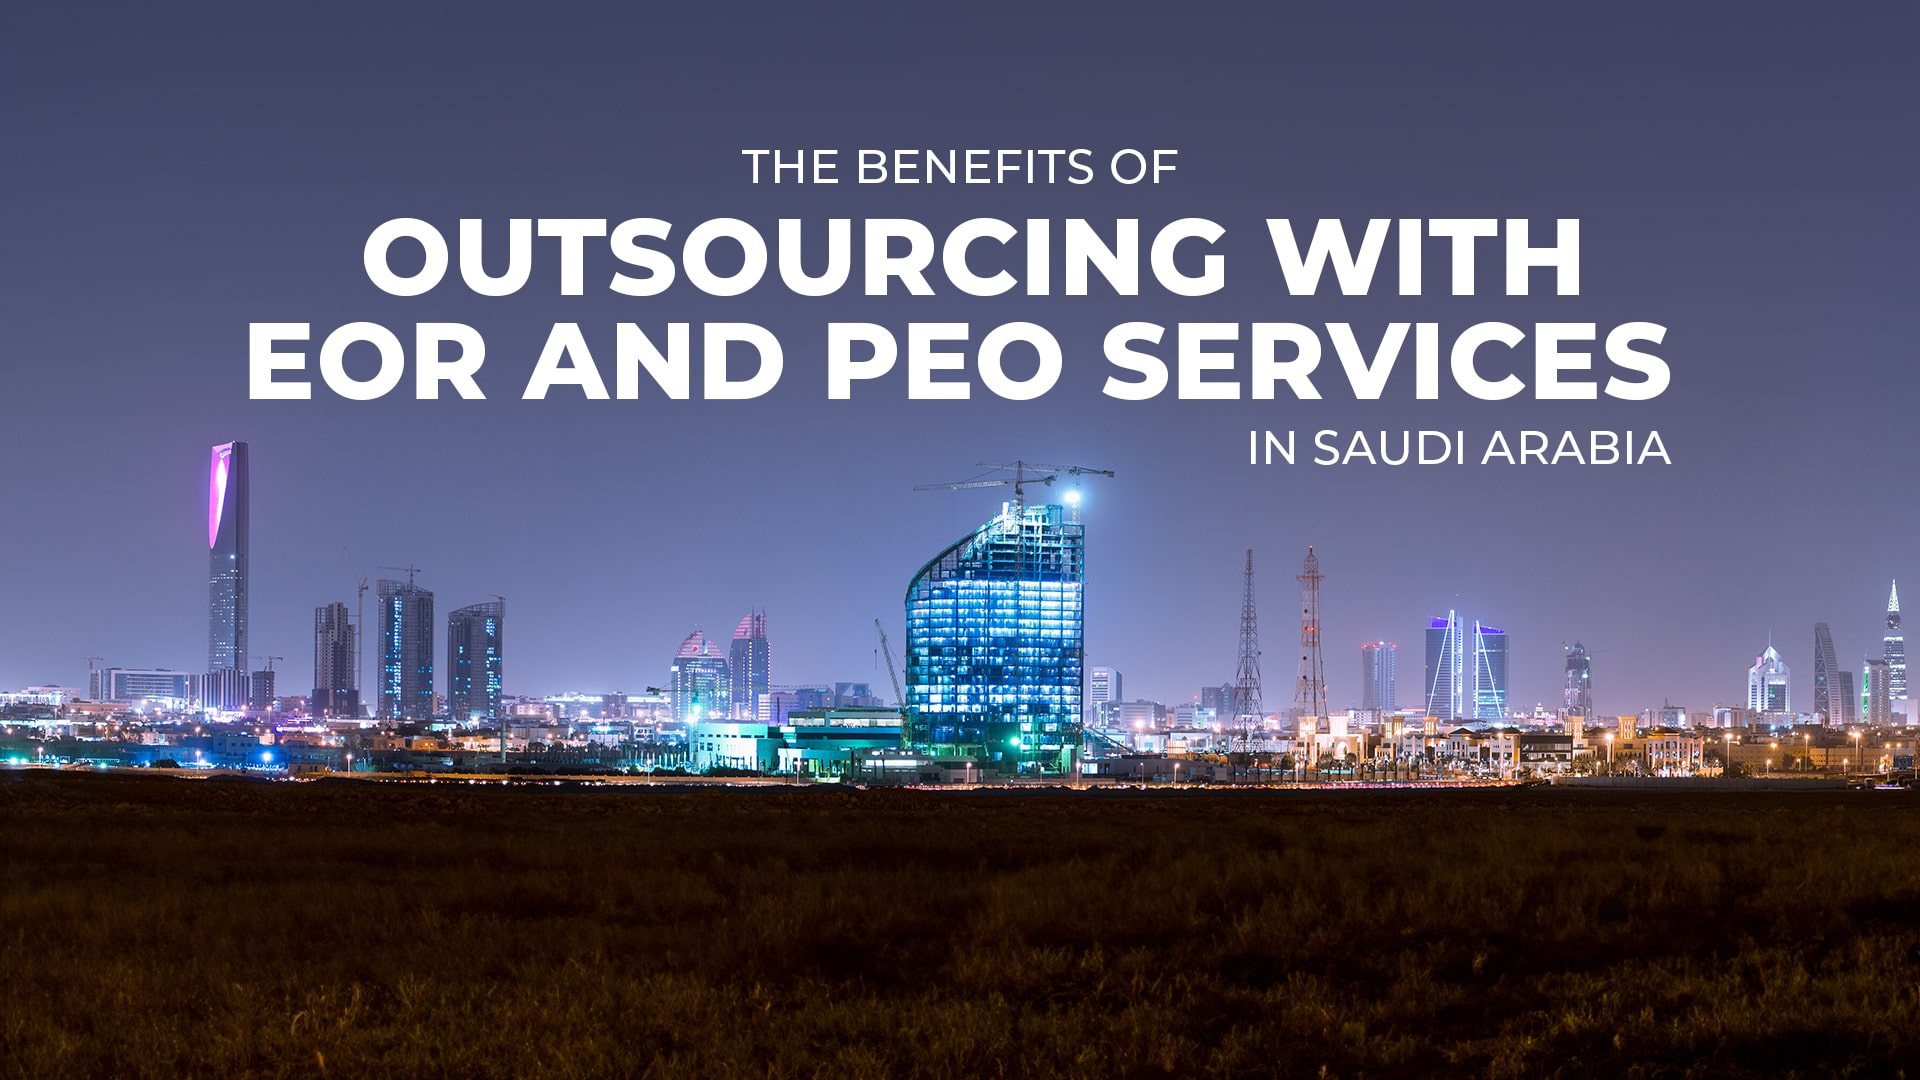 eor and peo services in saudi arabia